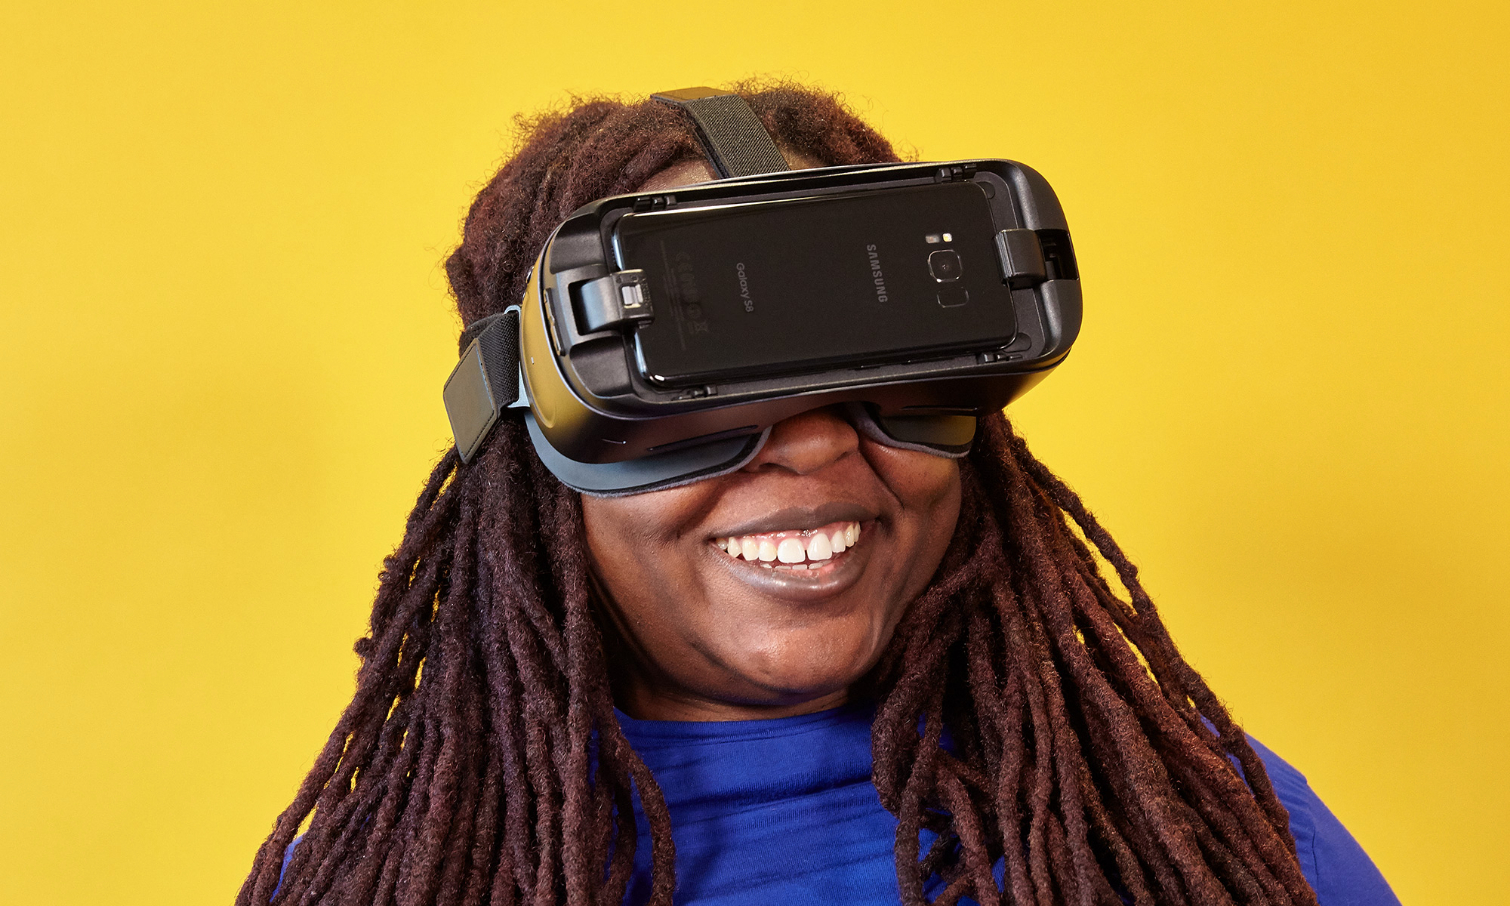 Samsung Gear Vr Review 17 A New Way To Play Tom S Guide